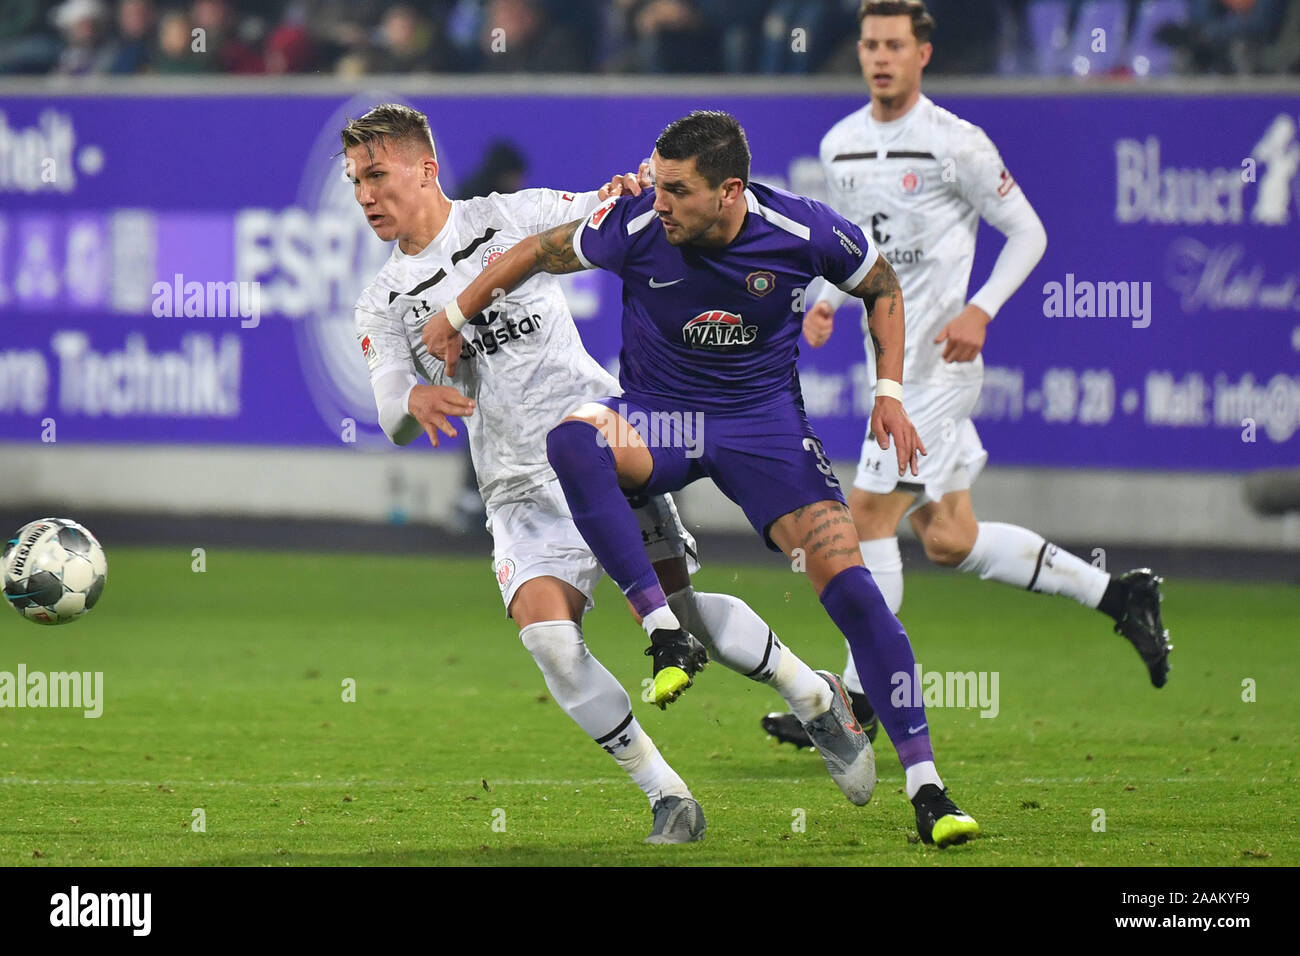 Viktor GYOEKERES (St.Pauli), action, duels versus Marko Mihojevic (Aue). Soccer 2. Bundesliga, 14.matchday, matchday14, Erzgebirge Aue-FC St.Pauli 3-1. on the 22.11.2019. ERZGEBIRGSSTADION AUE. DFL REGULATIONS PROHIBIT ANY USE OF PHOTOGRAPH AS IMAGE SEQUENCES AND/OR QUASI VIDEO. | usage worldwide Stock Photo